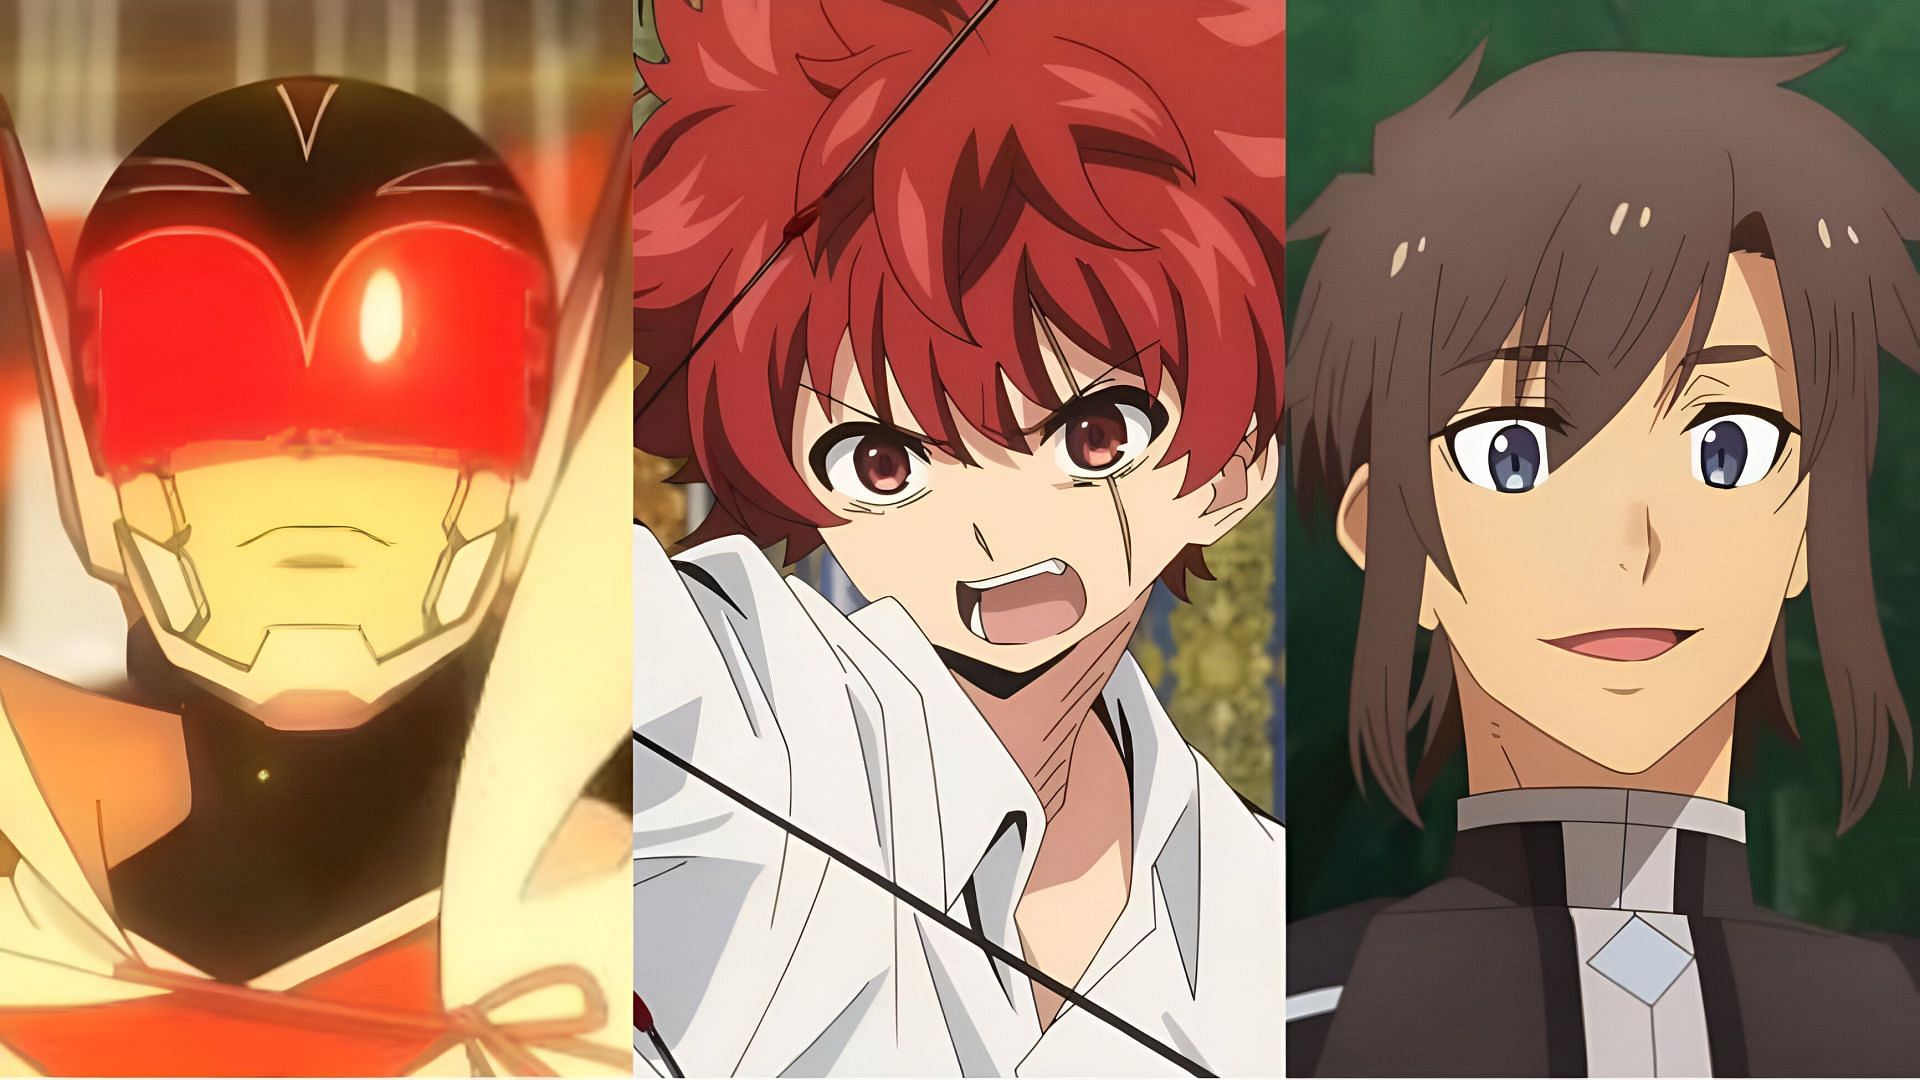 The underdogs of Spring Anime Season (Image via Silver Link, Yostar Pictures, &amp; J.C. Staff)